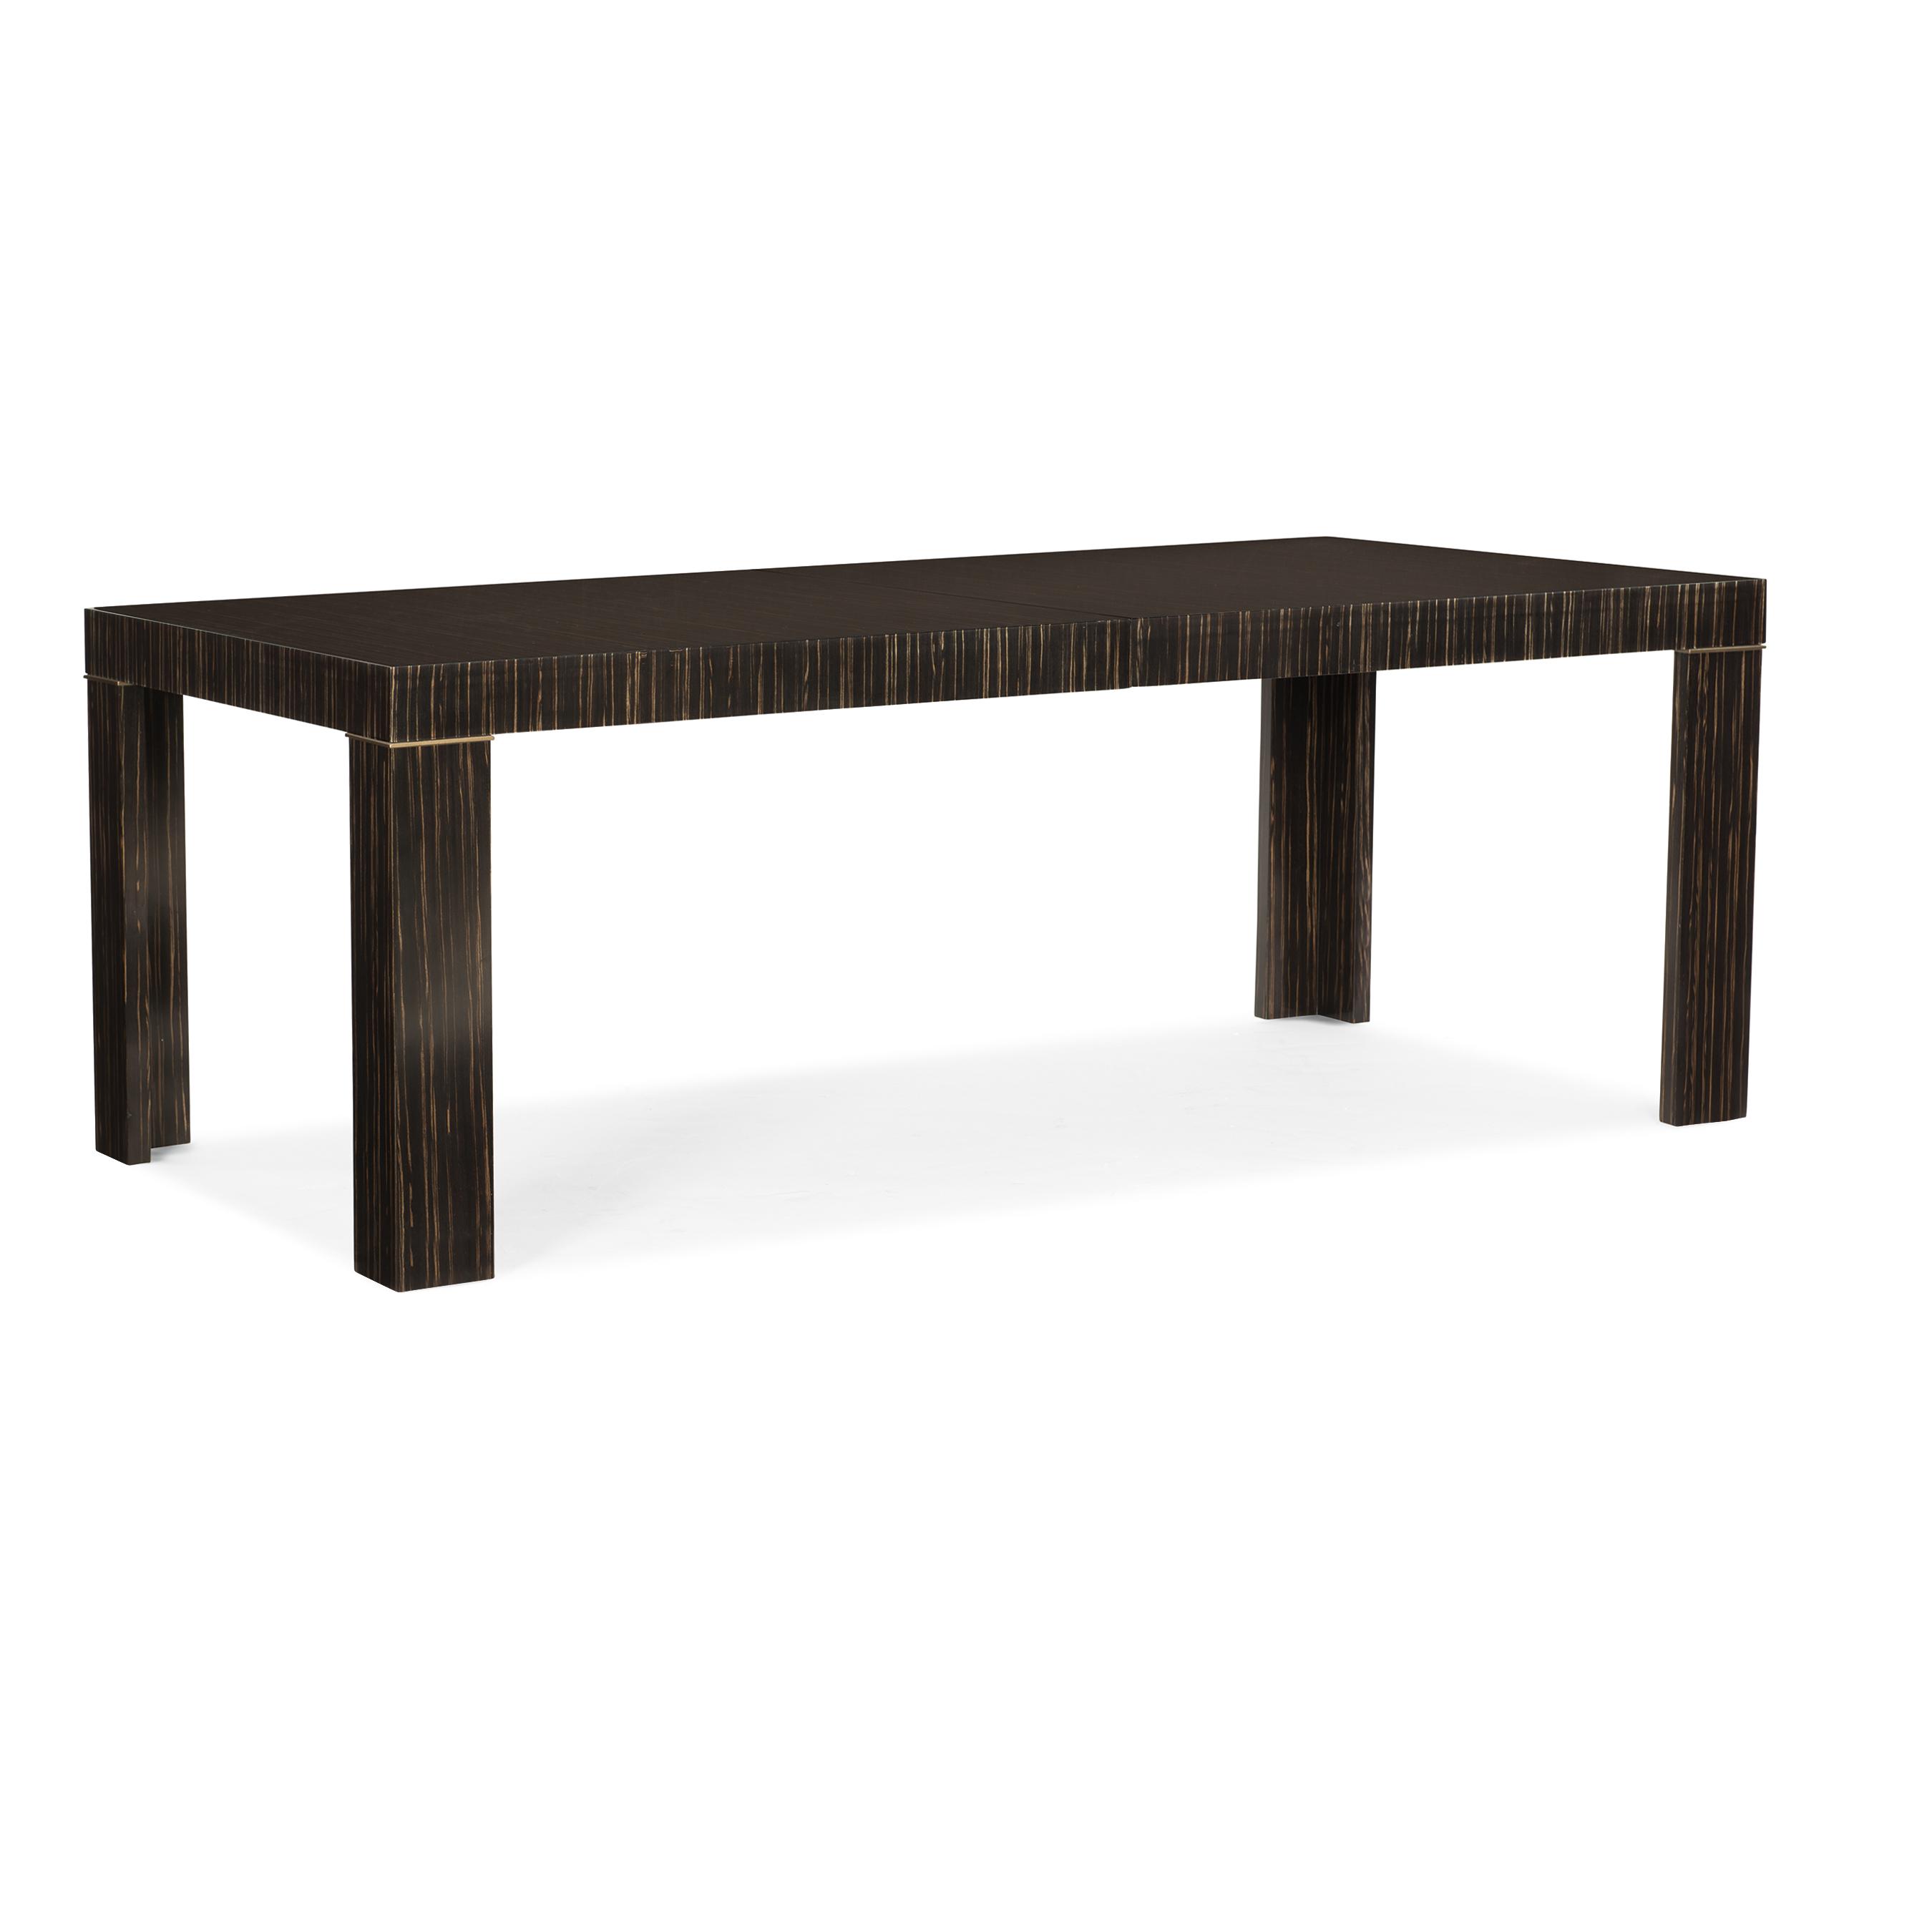 Contemporary Dining Table EDGE DINING TABLE M102-419-202 in Ebony, Bronze 